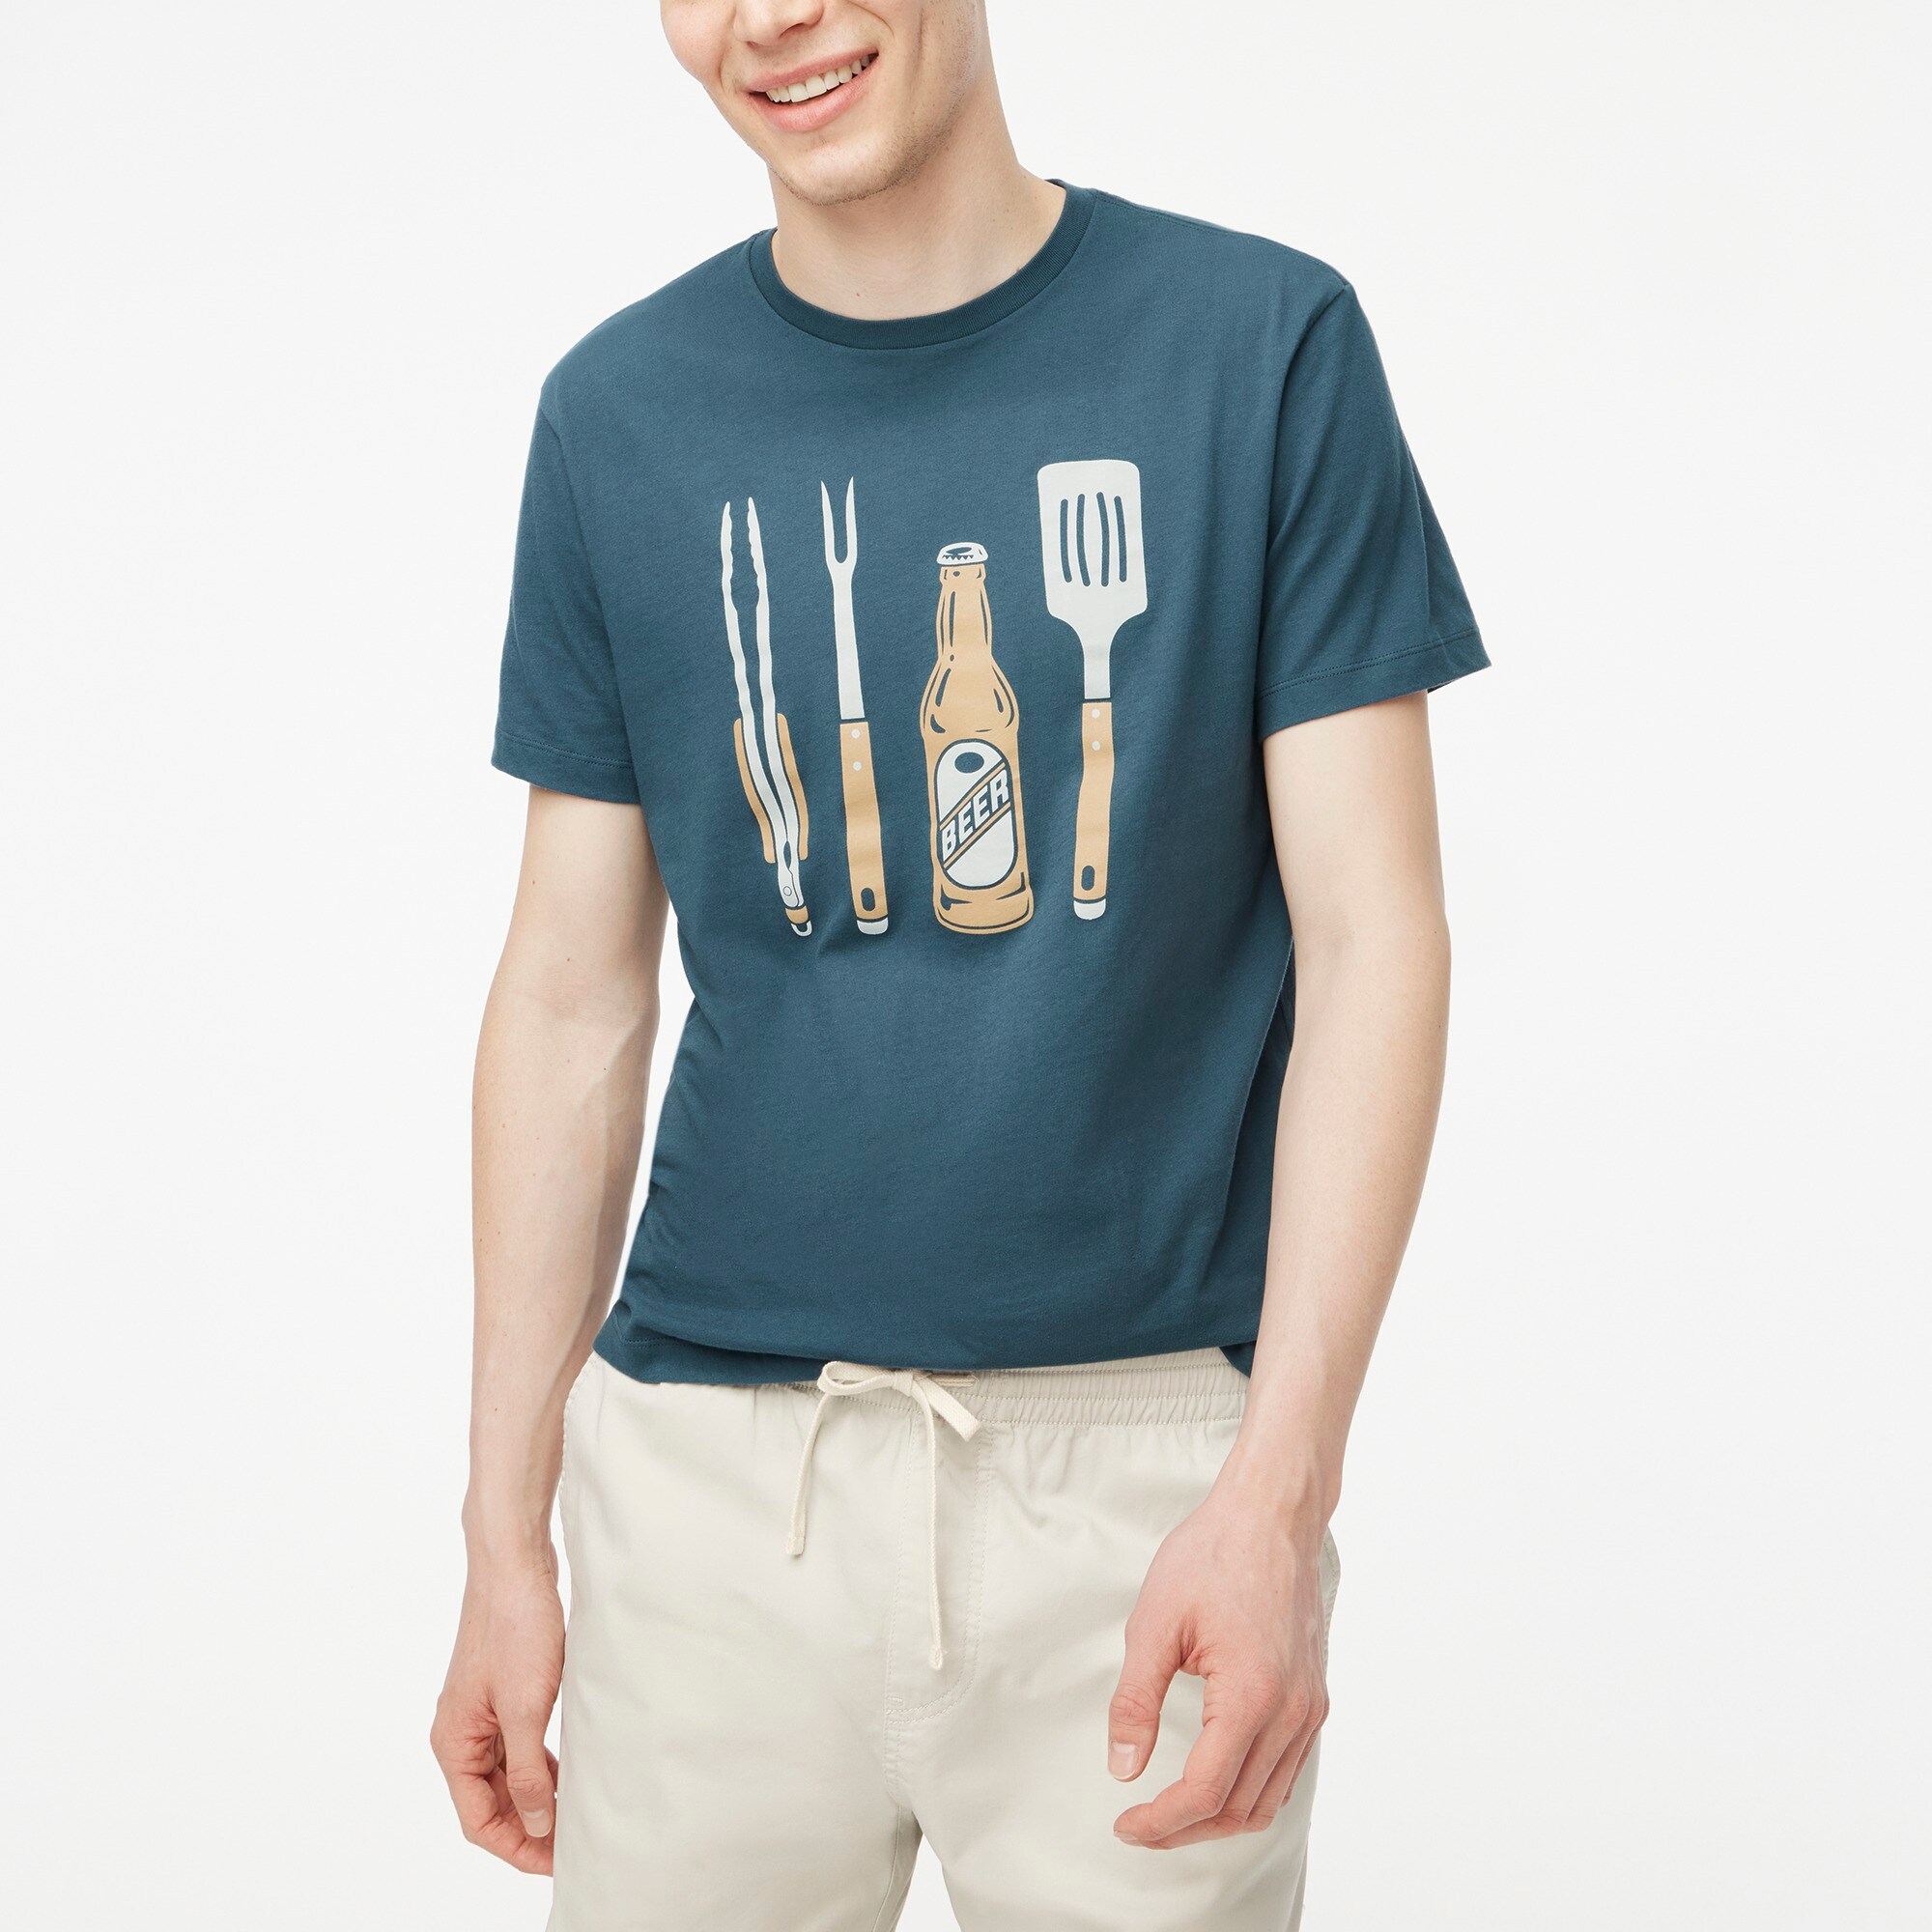 mens Grill tools graphic tee